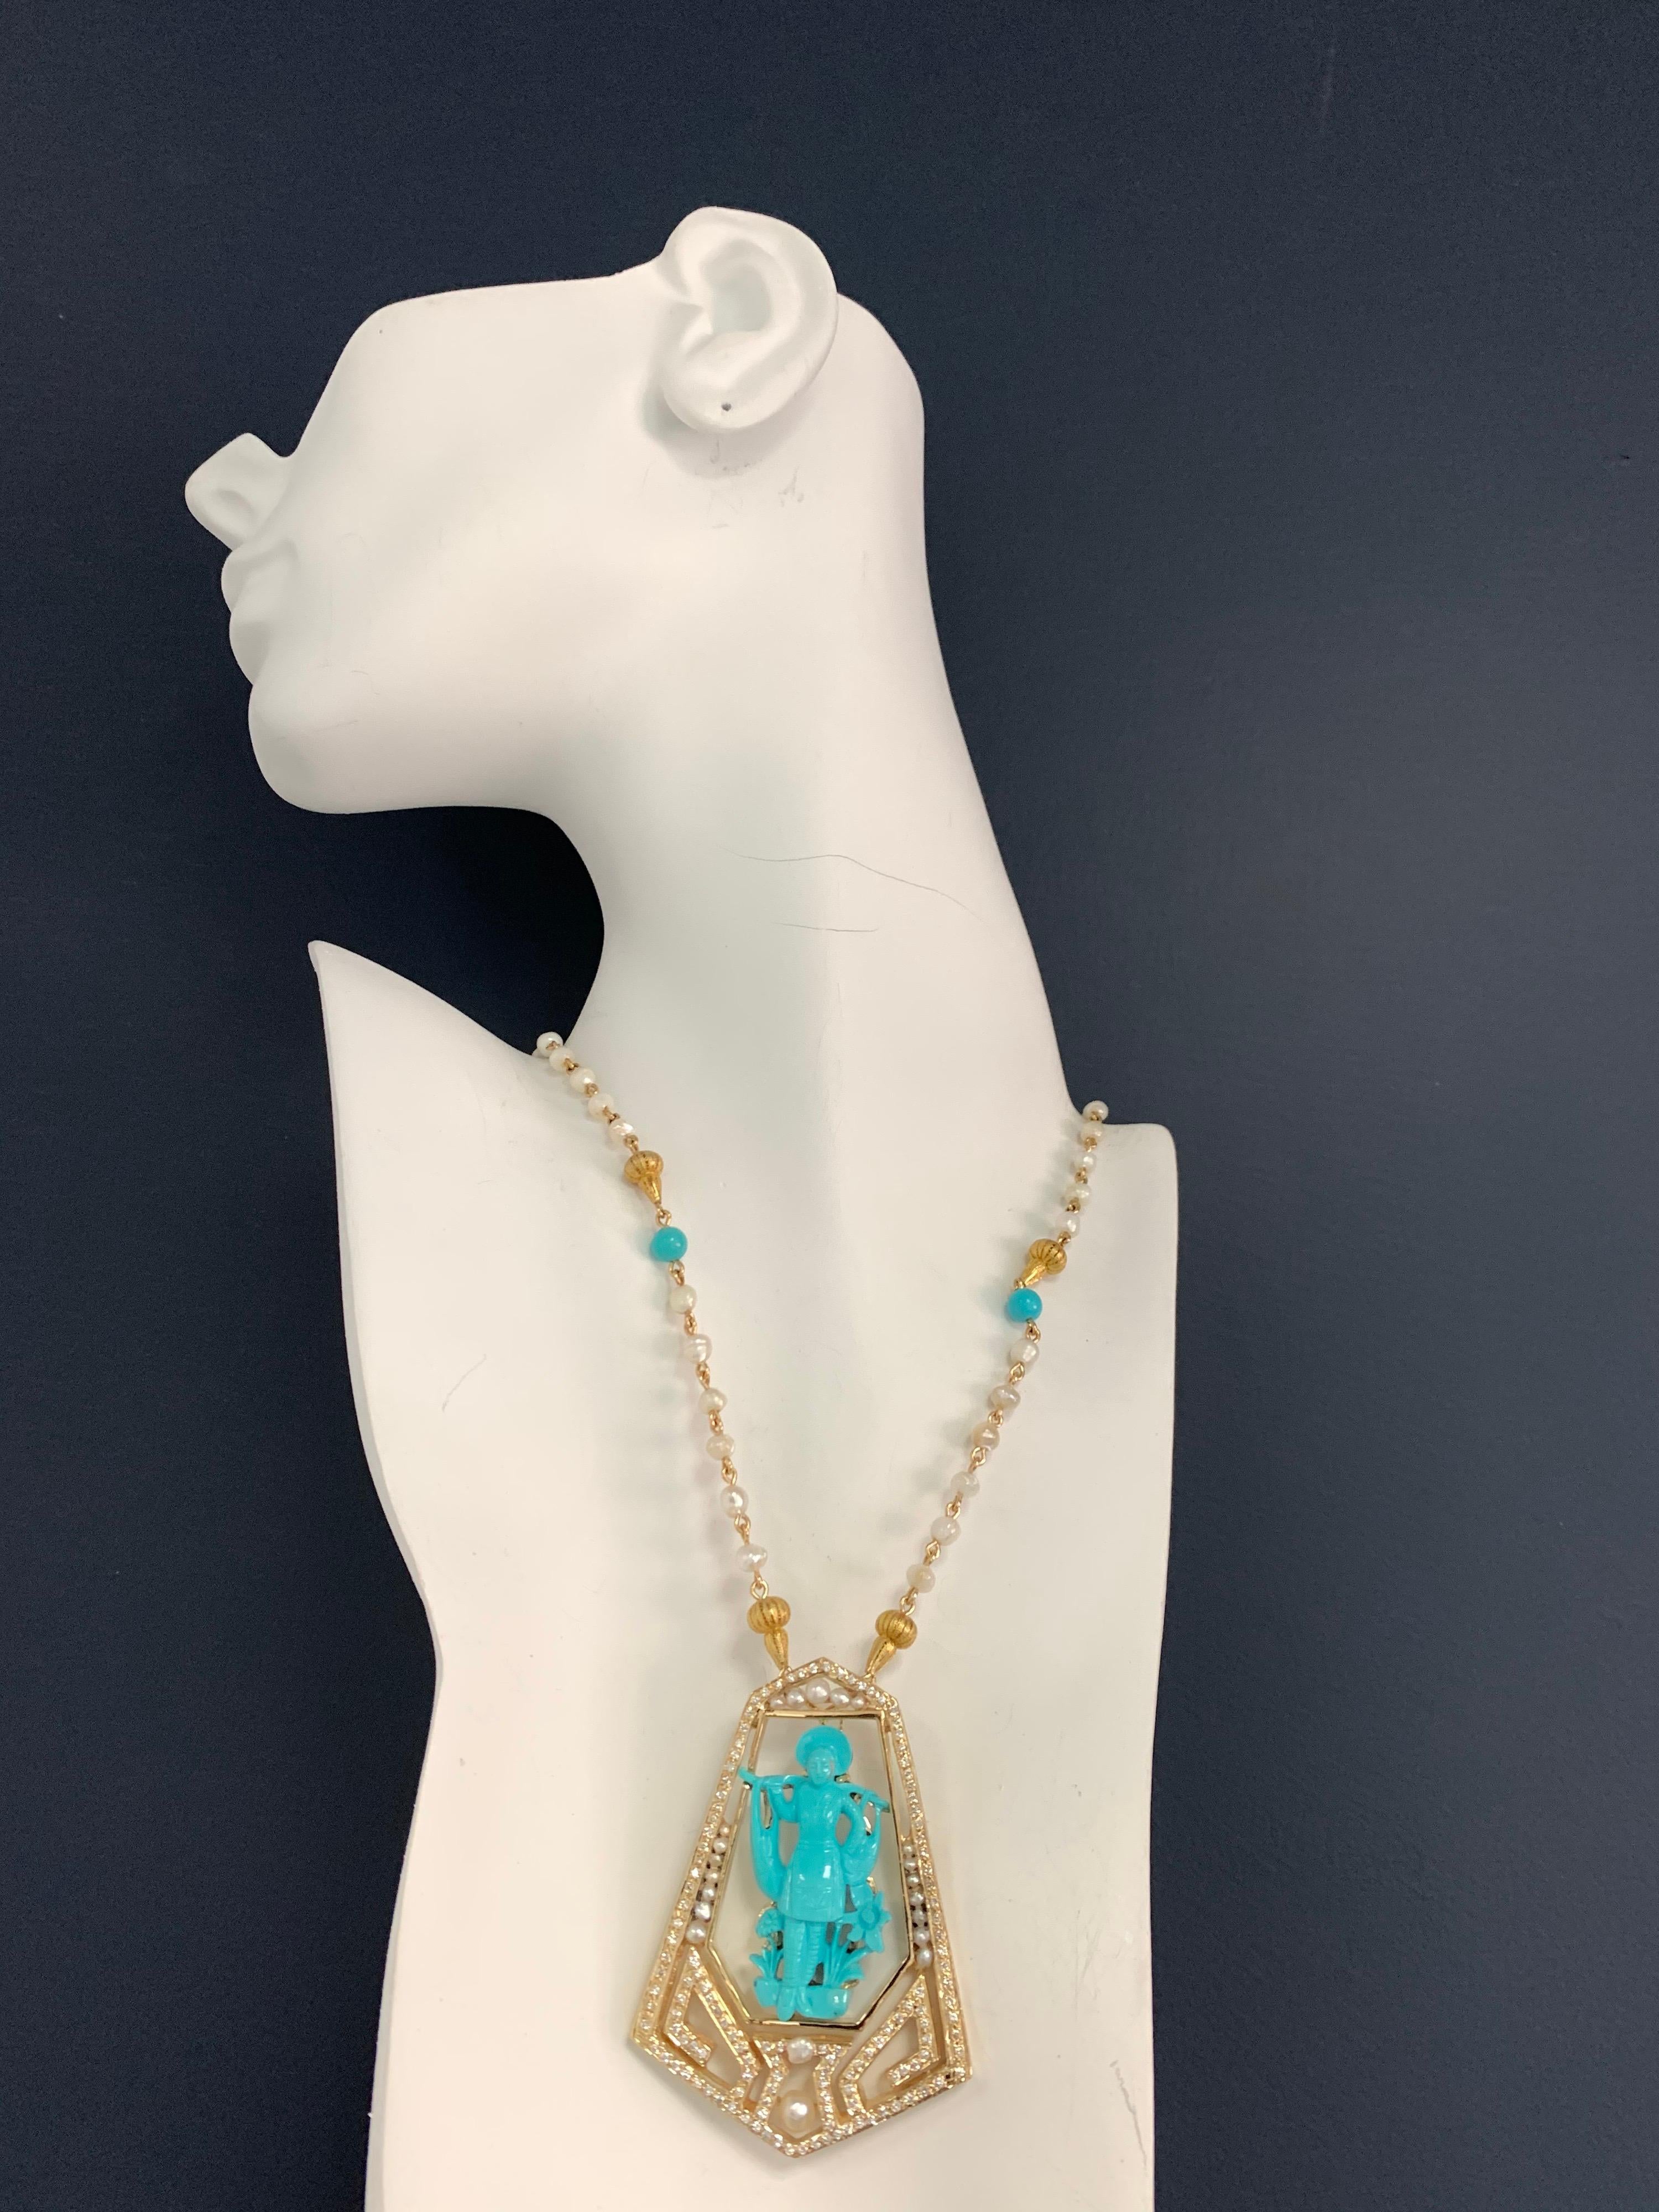 A Stunning 14k Yellow Gold Chinese Vintage Pendant, set with a Natural Hand Carved Turquoise and 134 Natural Round Brilliant Diamonds weighing approximately 1.25 carats (G in color and VS in clarity). 

The piece is set with Natural South Sea Pearls